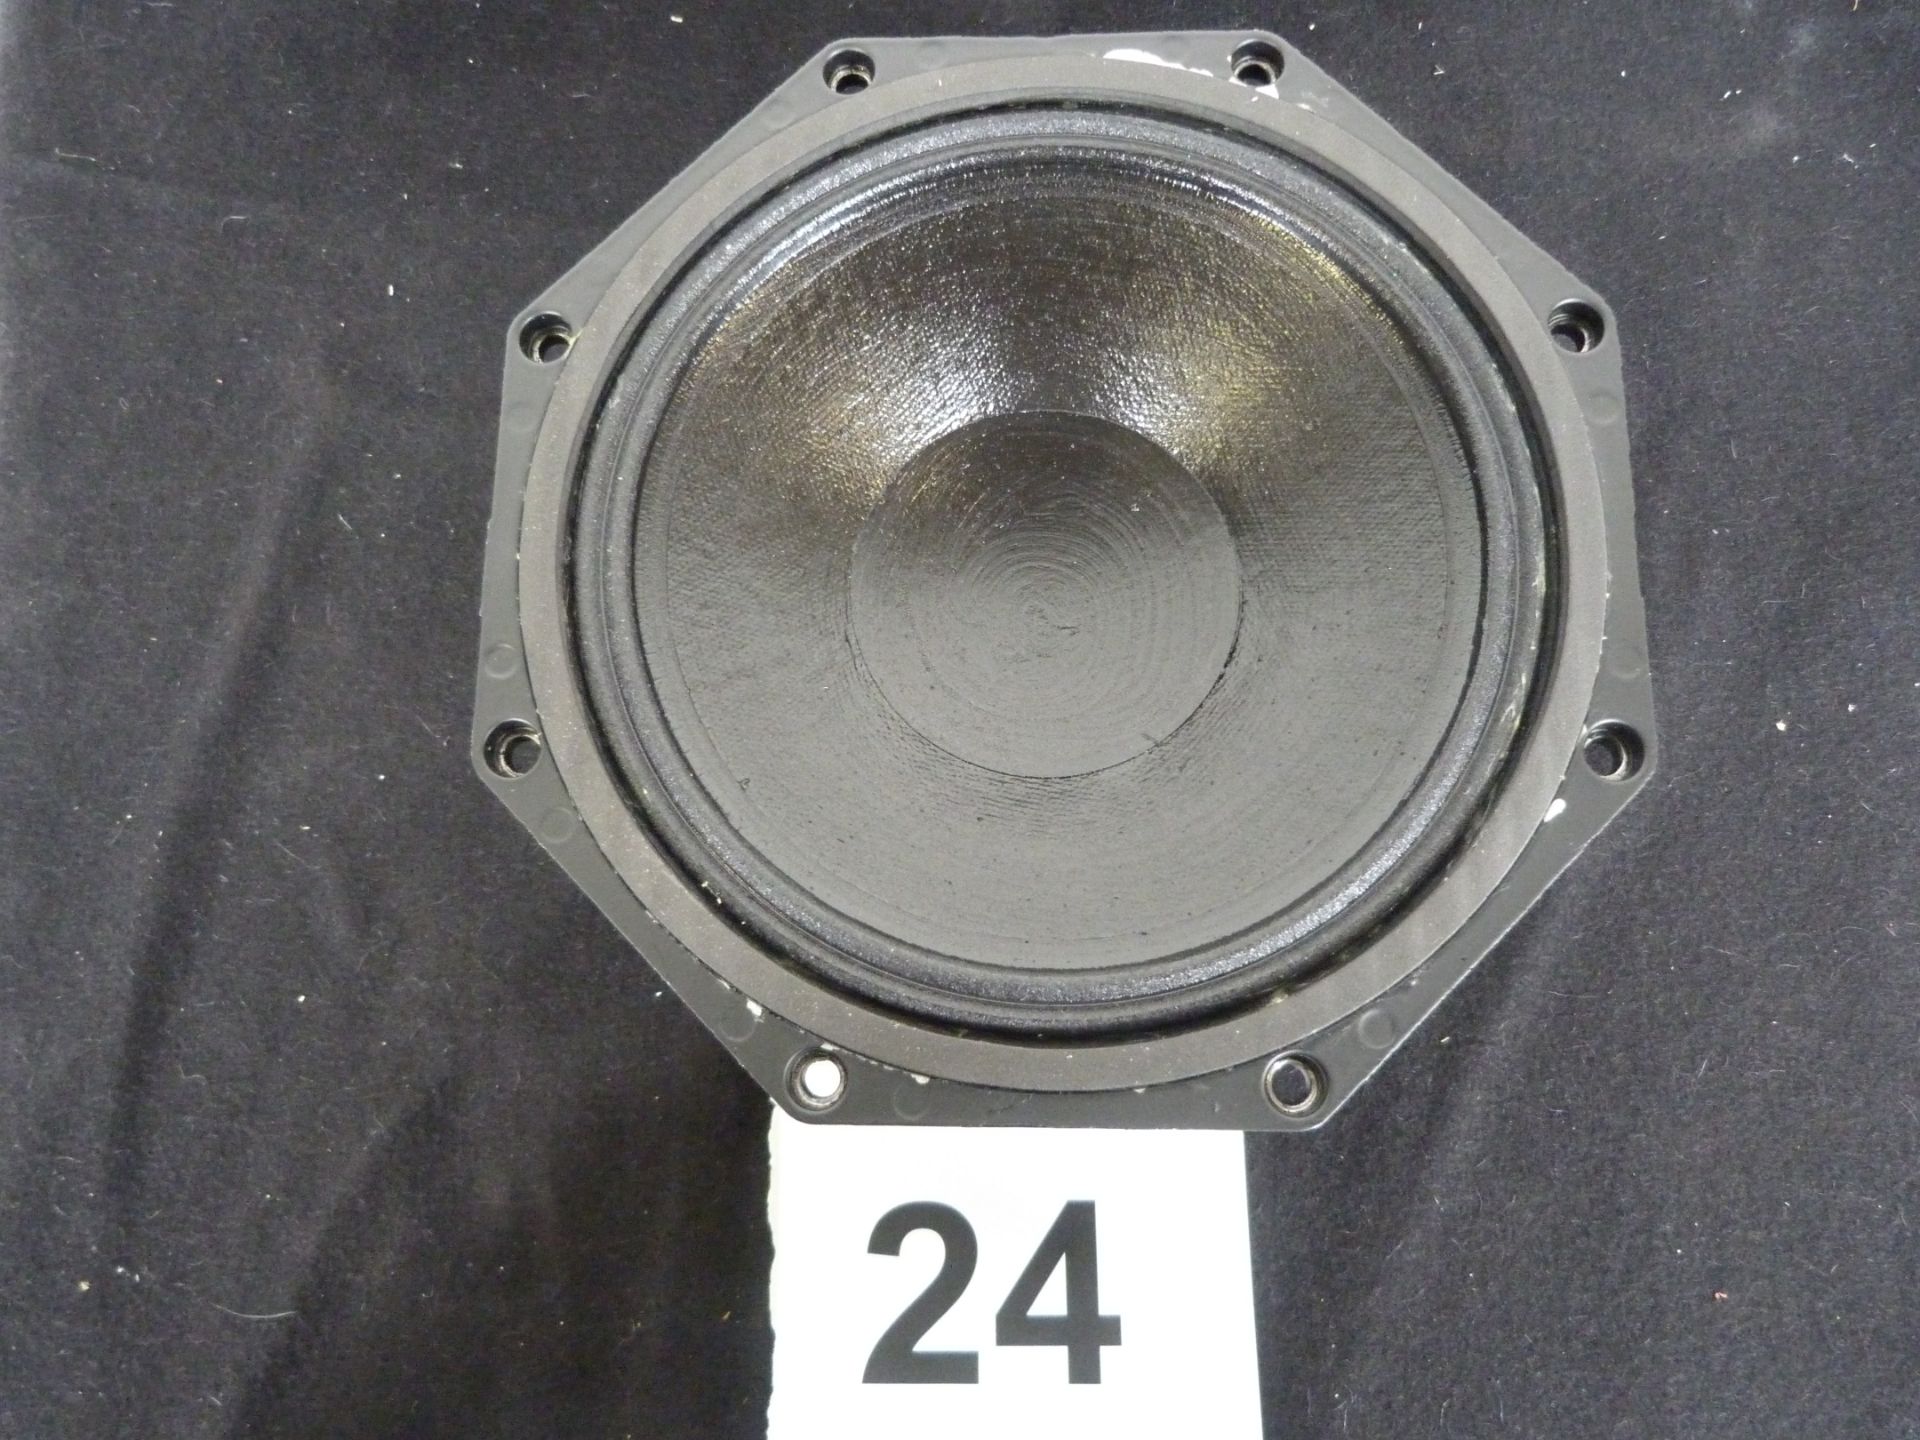 4x Martin Audio DLS 8001 16 Ohm 8" LF Driver For W8LM. Ex-hire/Working, Re-coned 2021 - Image 14 of 14